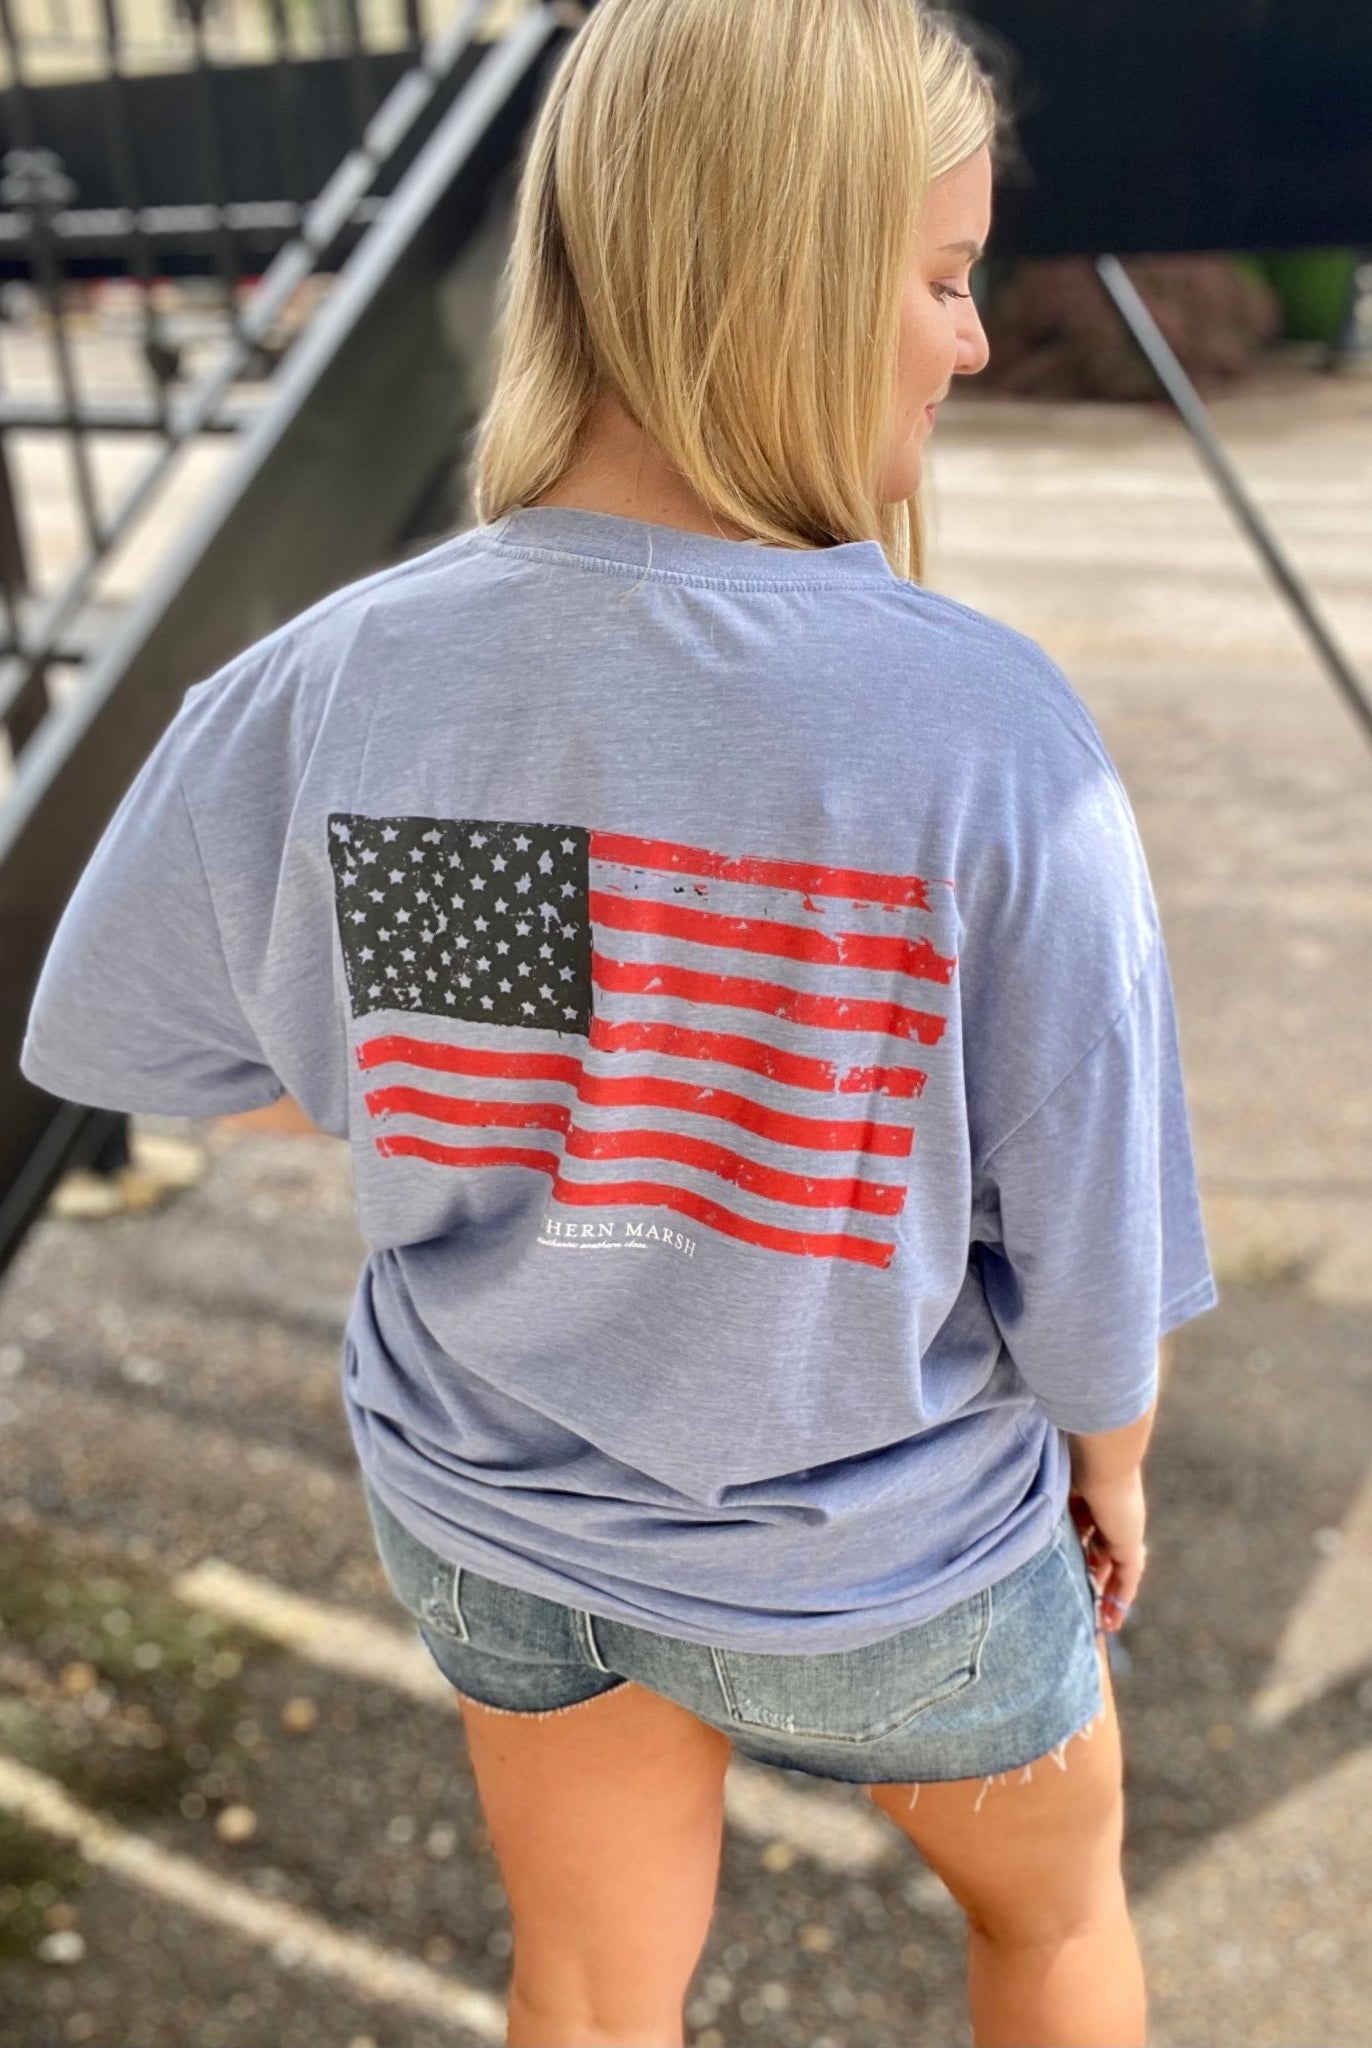 Southern Marsh Seawash Tee - Vintage Flag Blue - Southern Marsh Graphic Tee -Jimberly's Boutique-Olive Branch-Mississippi